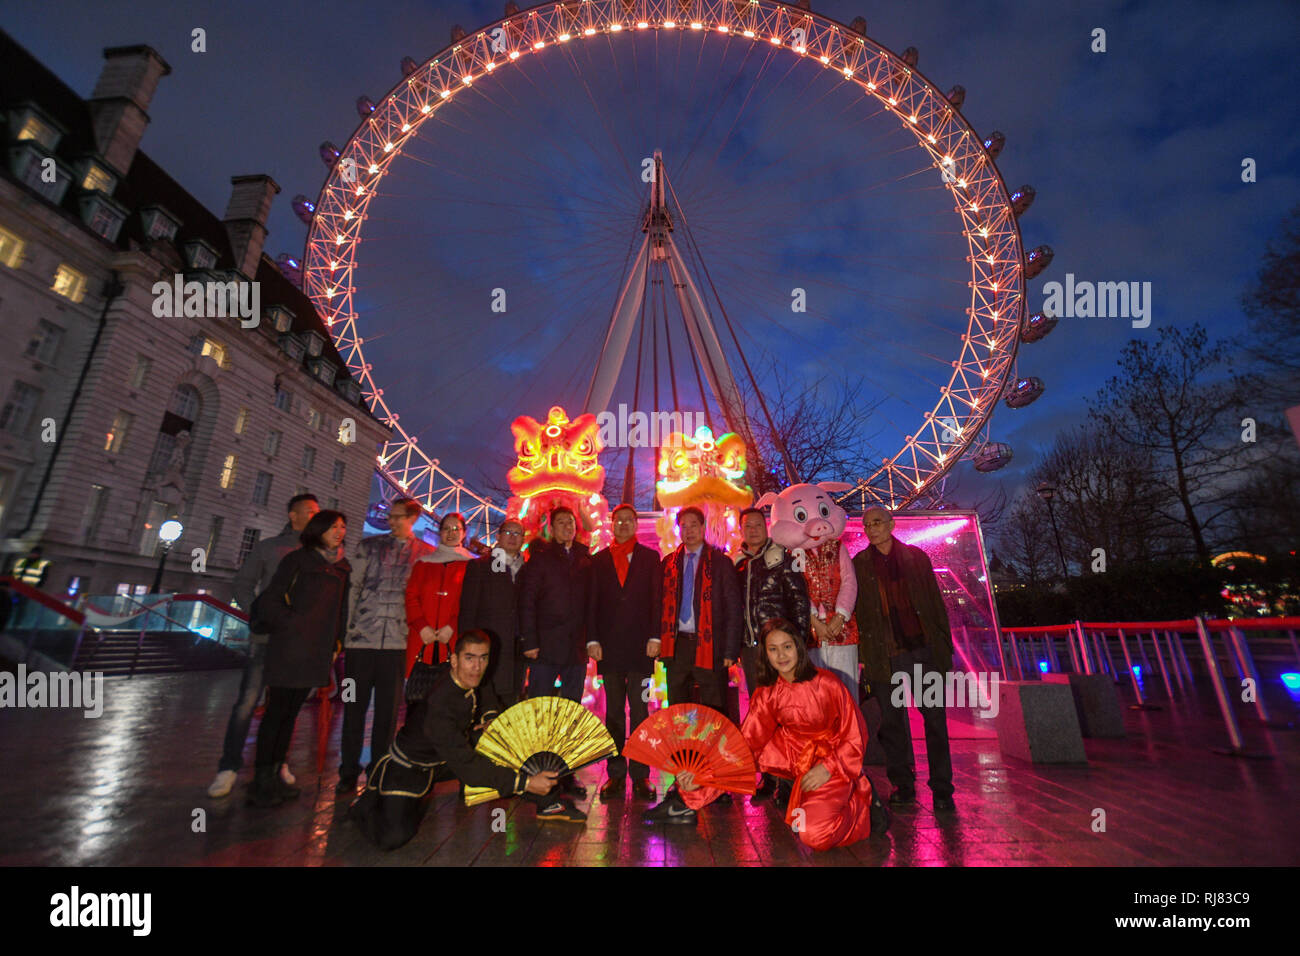 Chinese new year at the London Eye, its the year of the pig and the eye turned red and gold to celebrate the new year. LCCA Festival of Spring Celebrations in London. Stock Photo